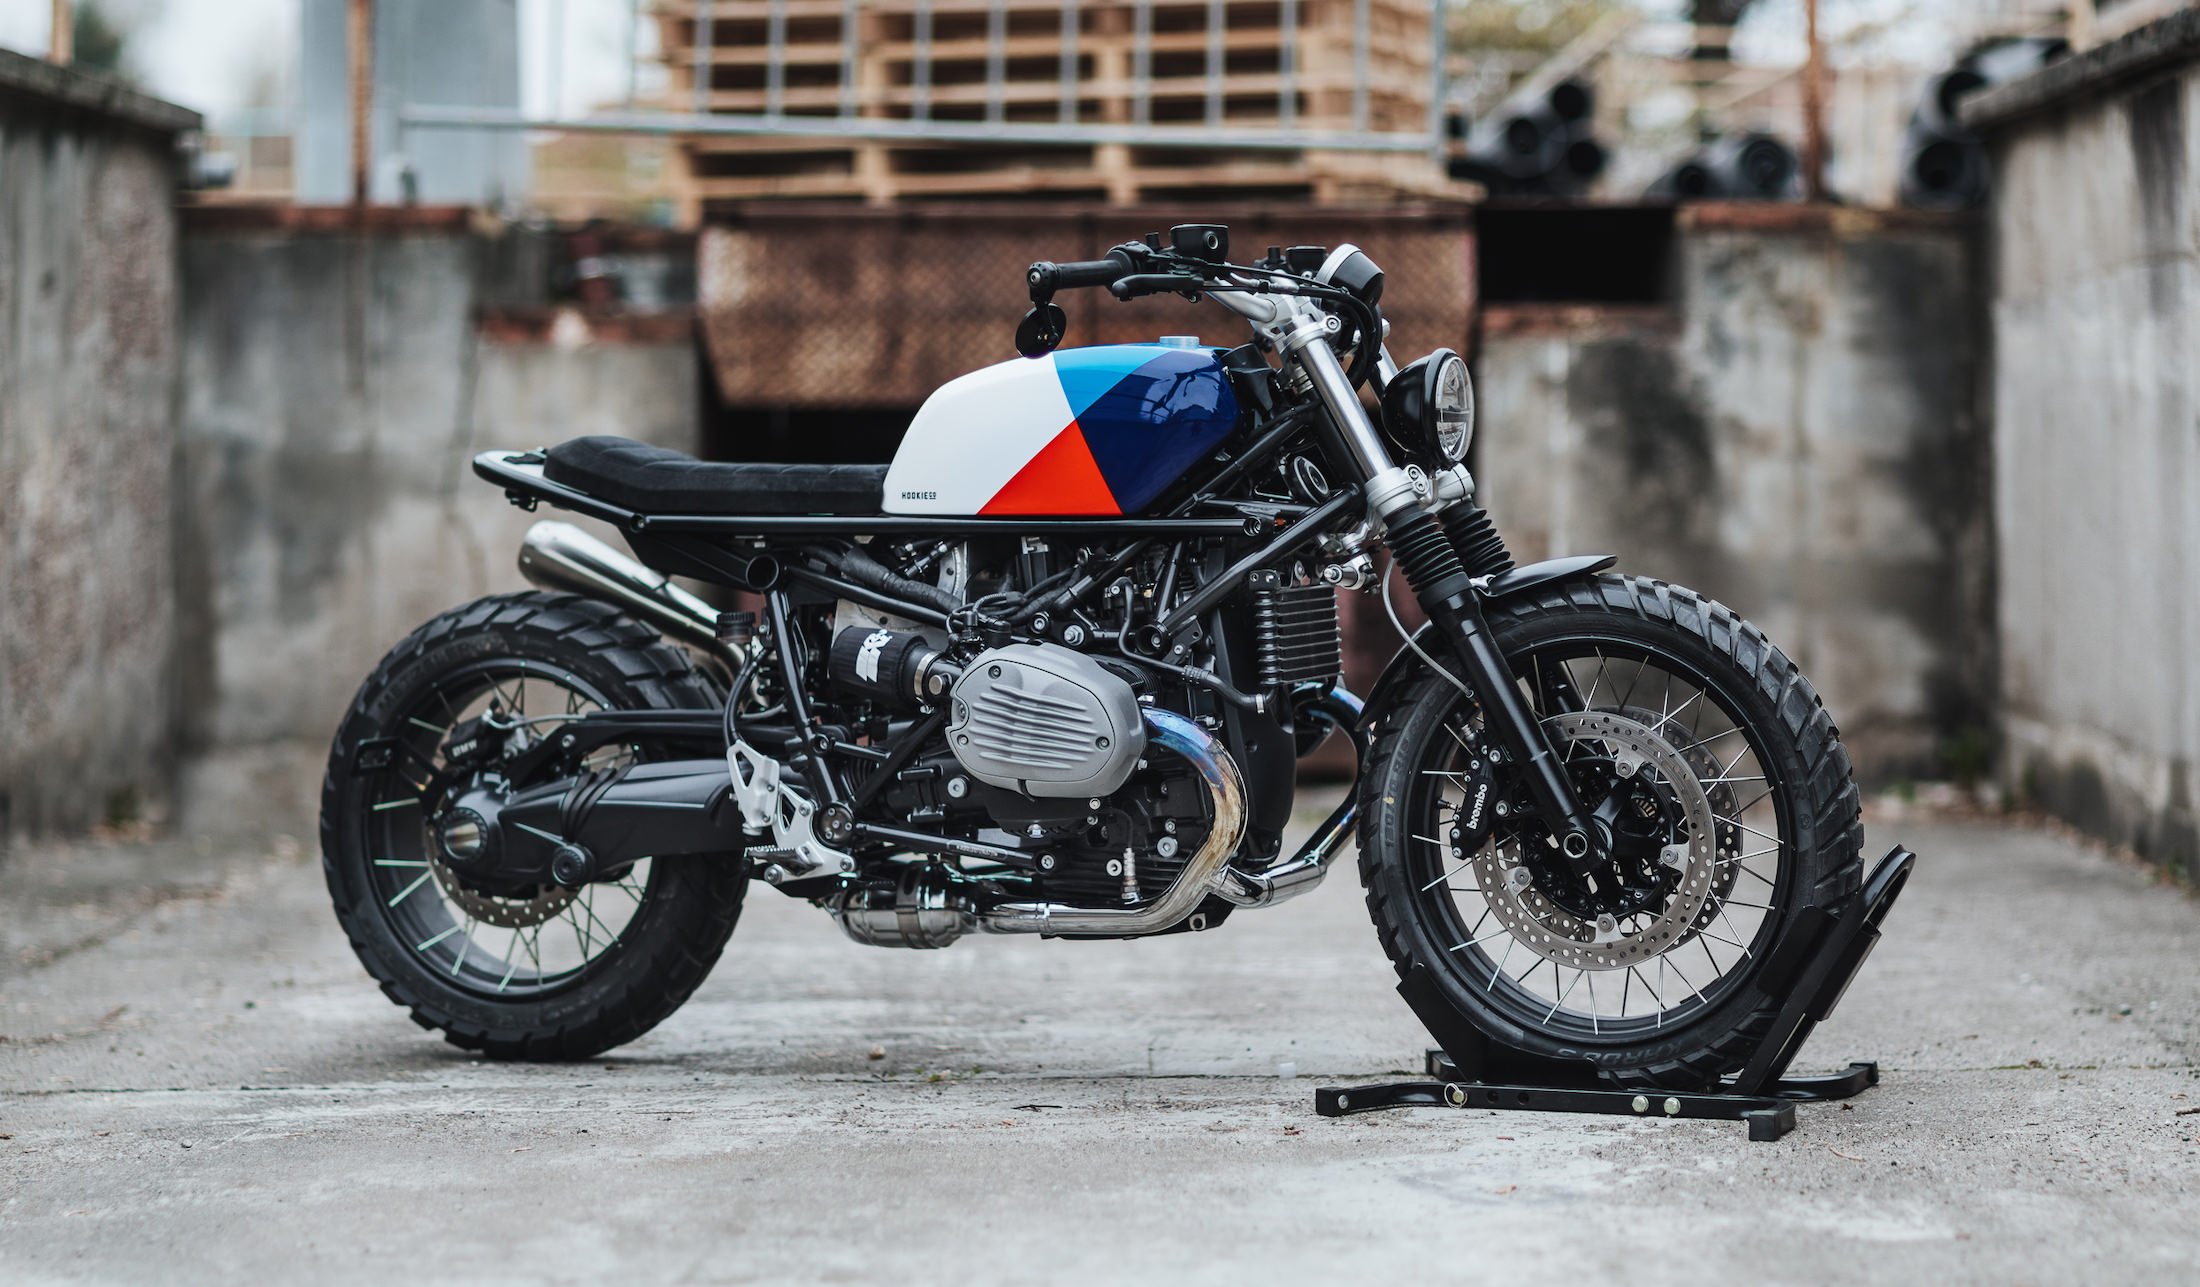 Hookie Moto-Kit for the BMW R NineT – Transform Your Bike In One Day